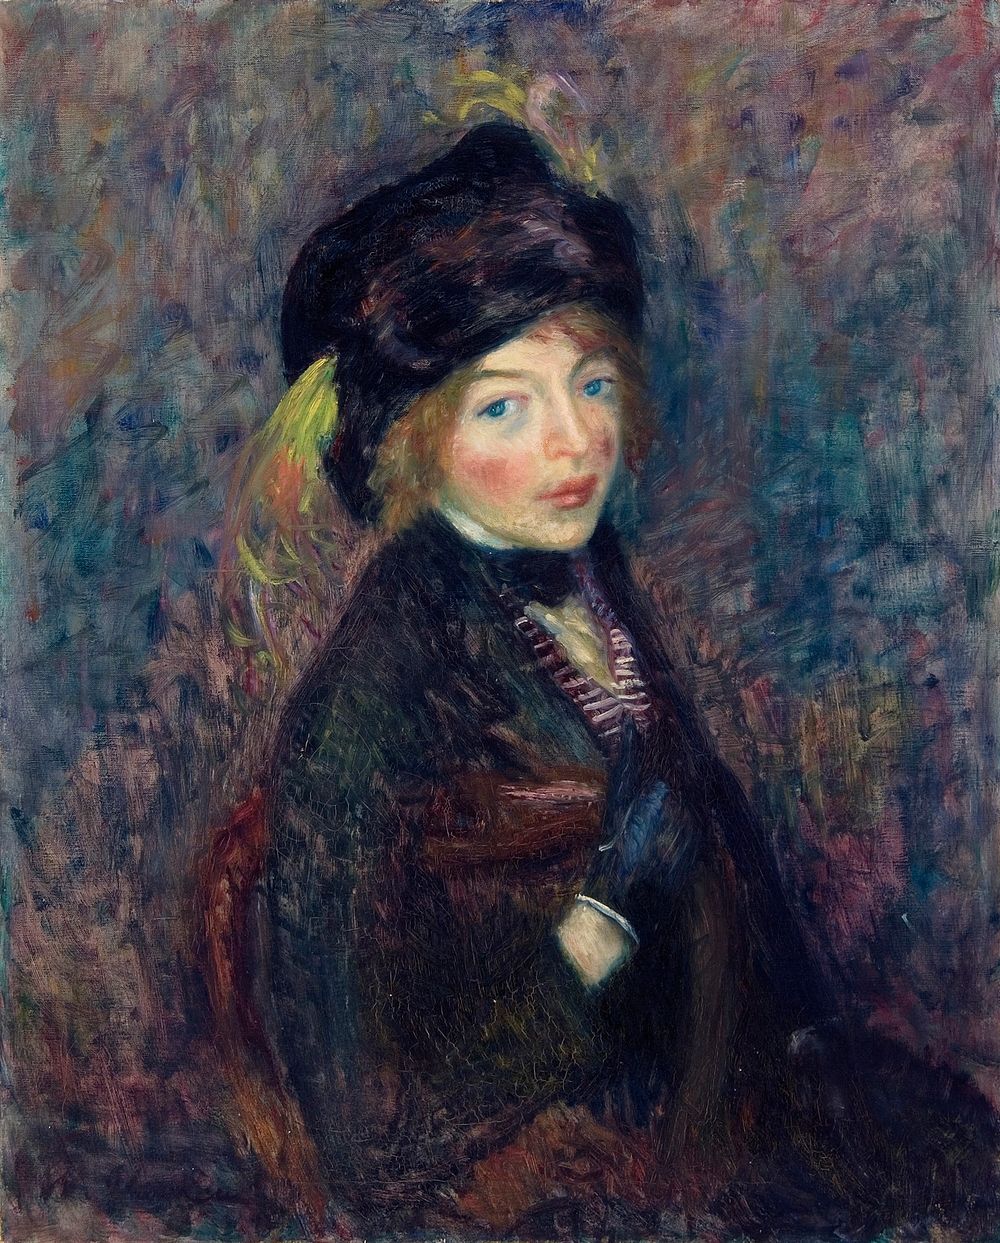 Head of Girl, Feather in Turban by William James Glackens